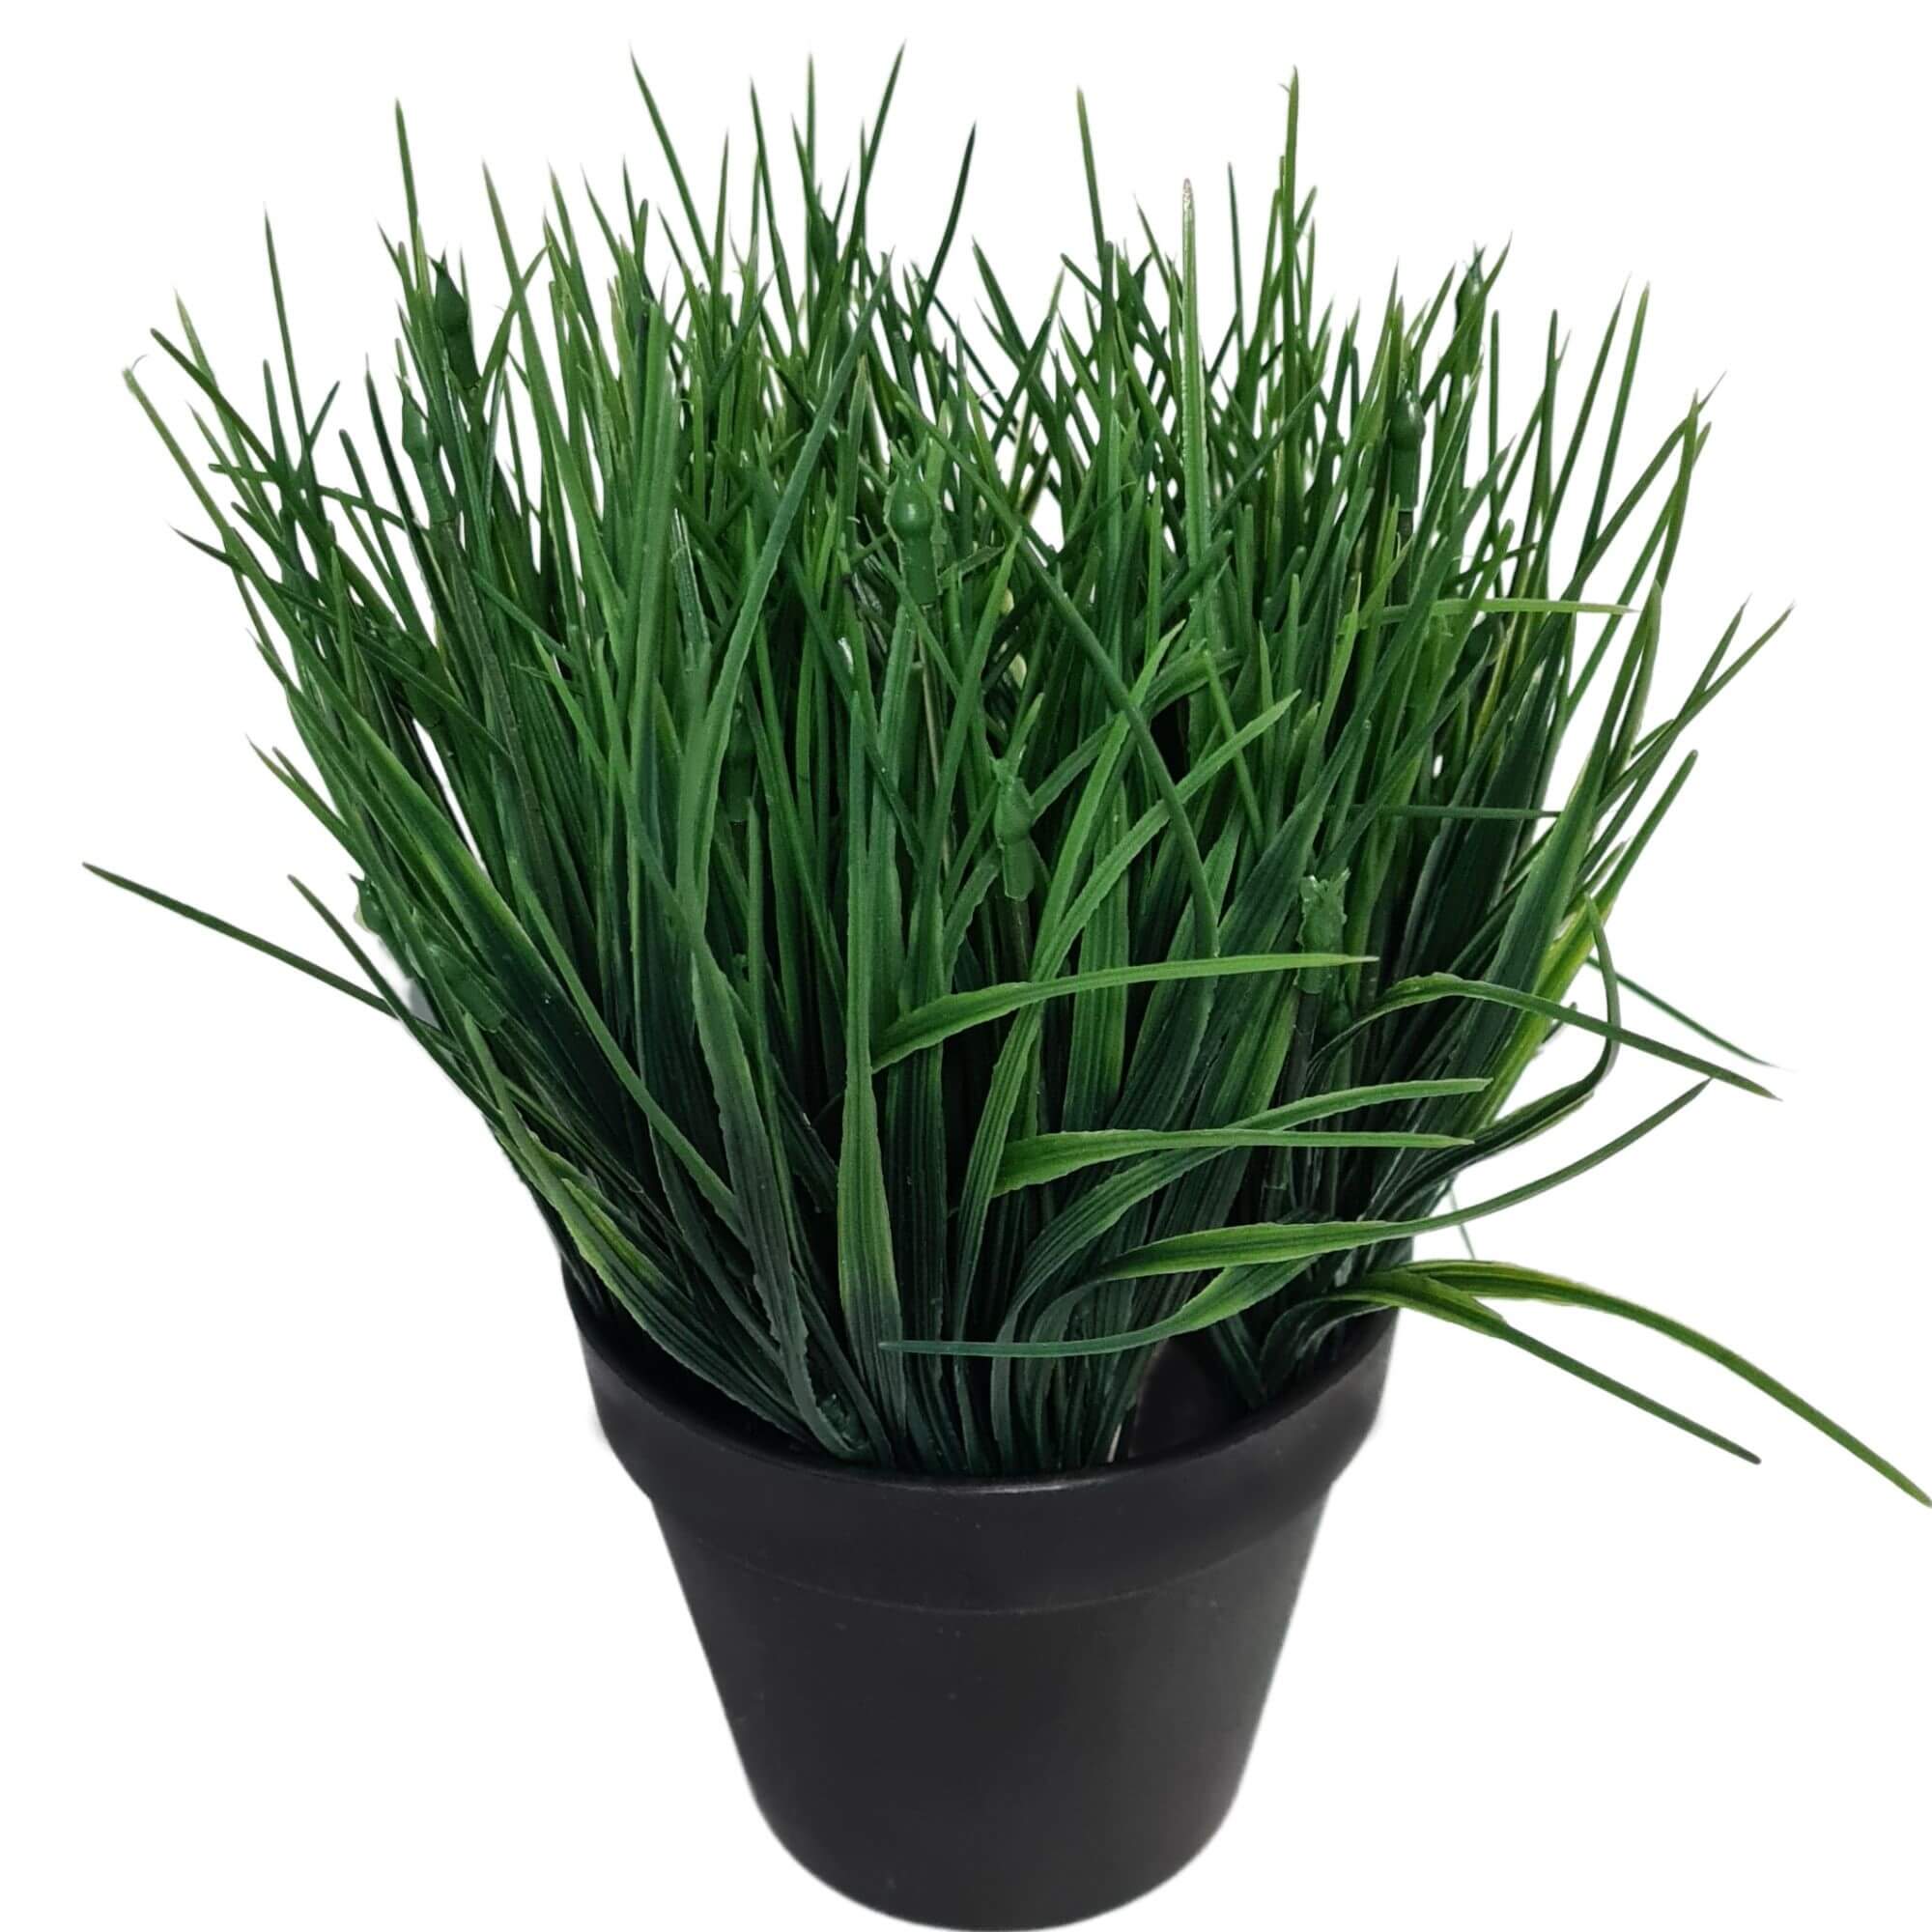 Artificial Ornamental Potted Dense Green Grass UV Resistant 30cm (Overstock Clearance) - Designer Vertical Gardens Artificial Shrubs and Small plants Office and House plants